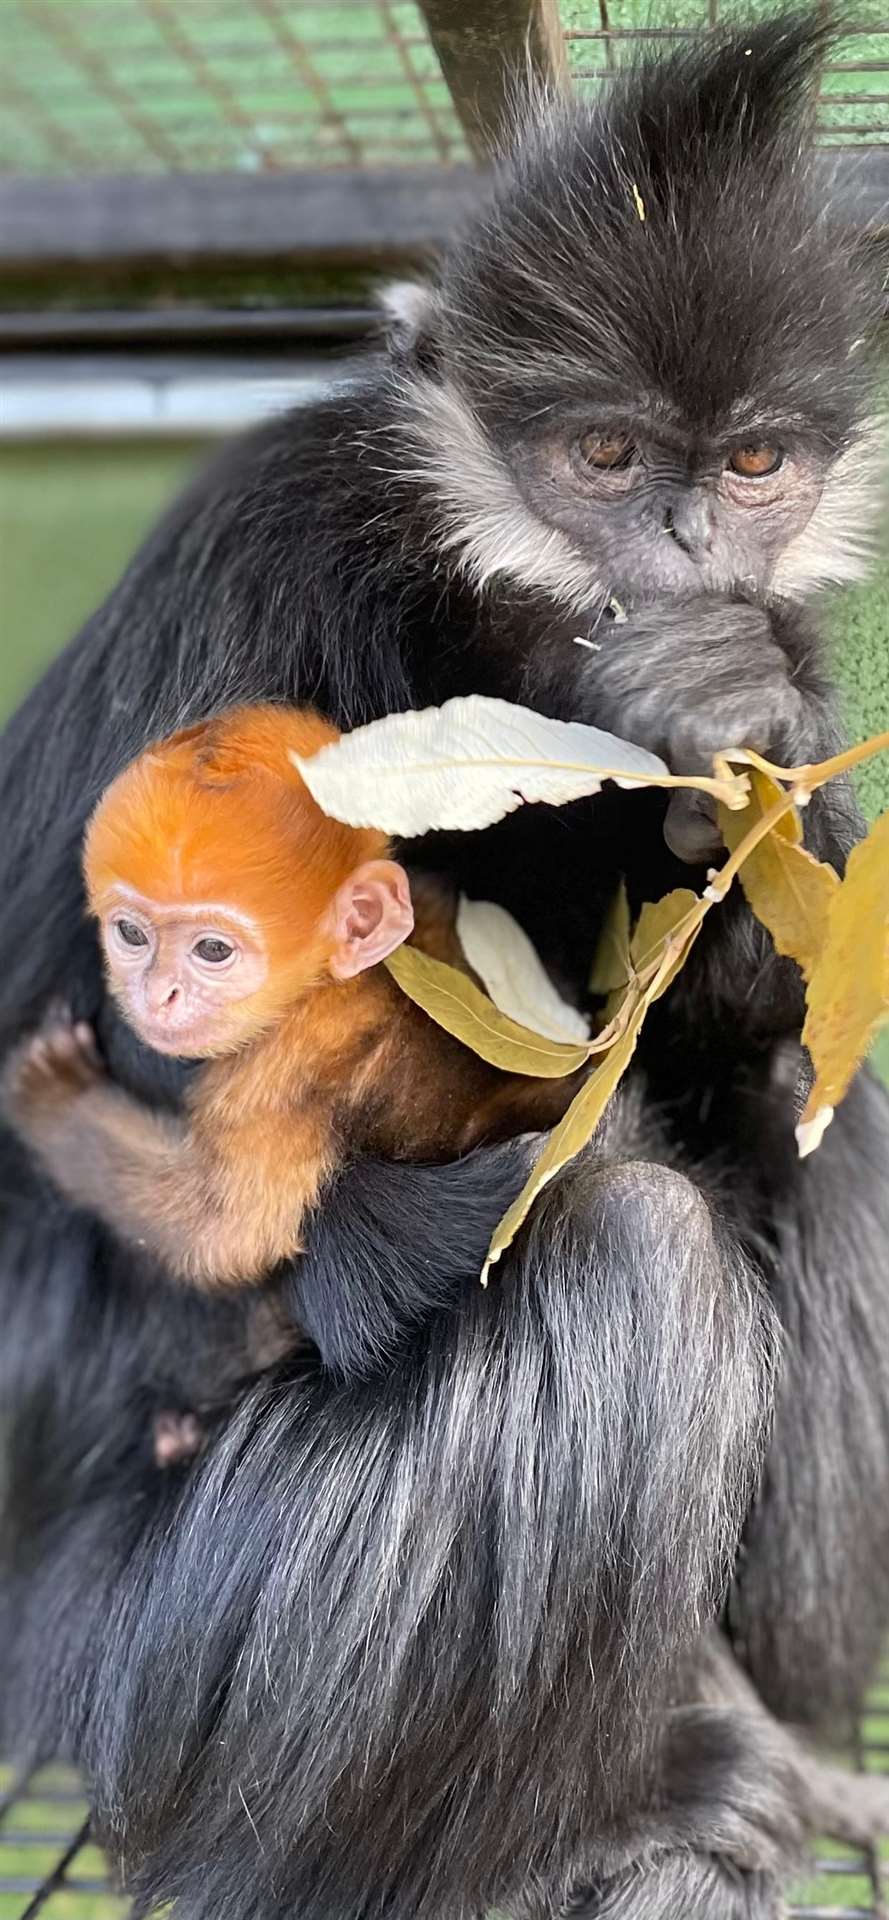 In contrast to the adult François’ langurs monochromatic coats, infants are born with bright orange fur (Whipsnade Zoo/PA)